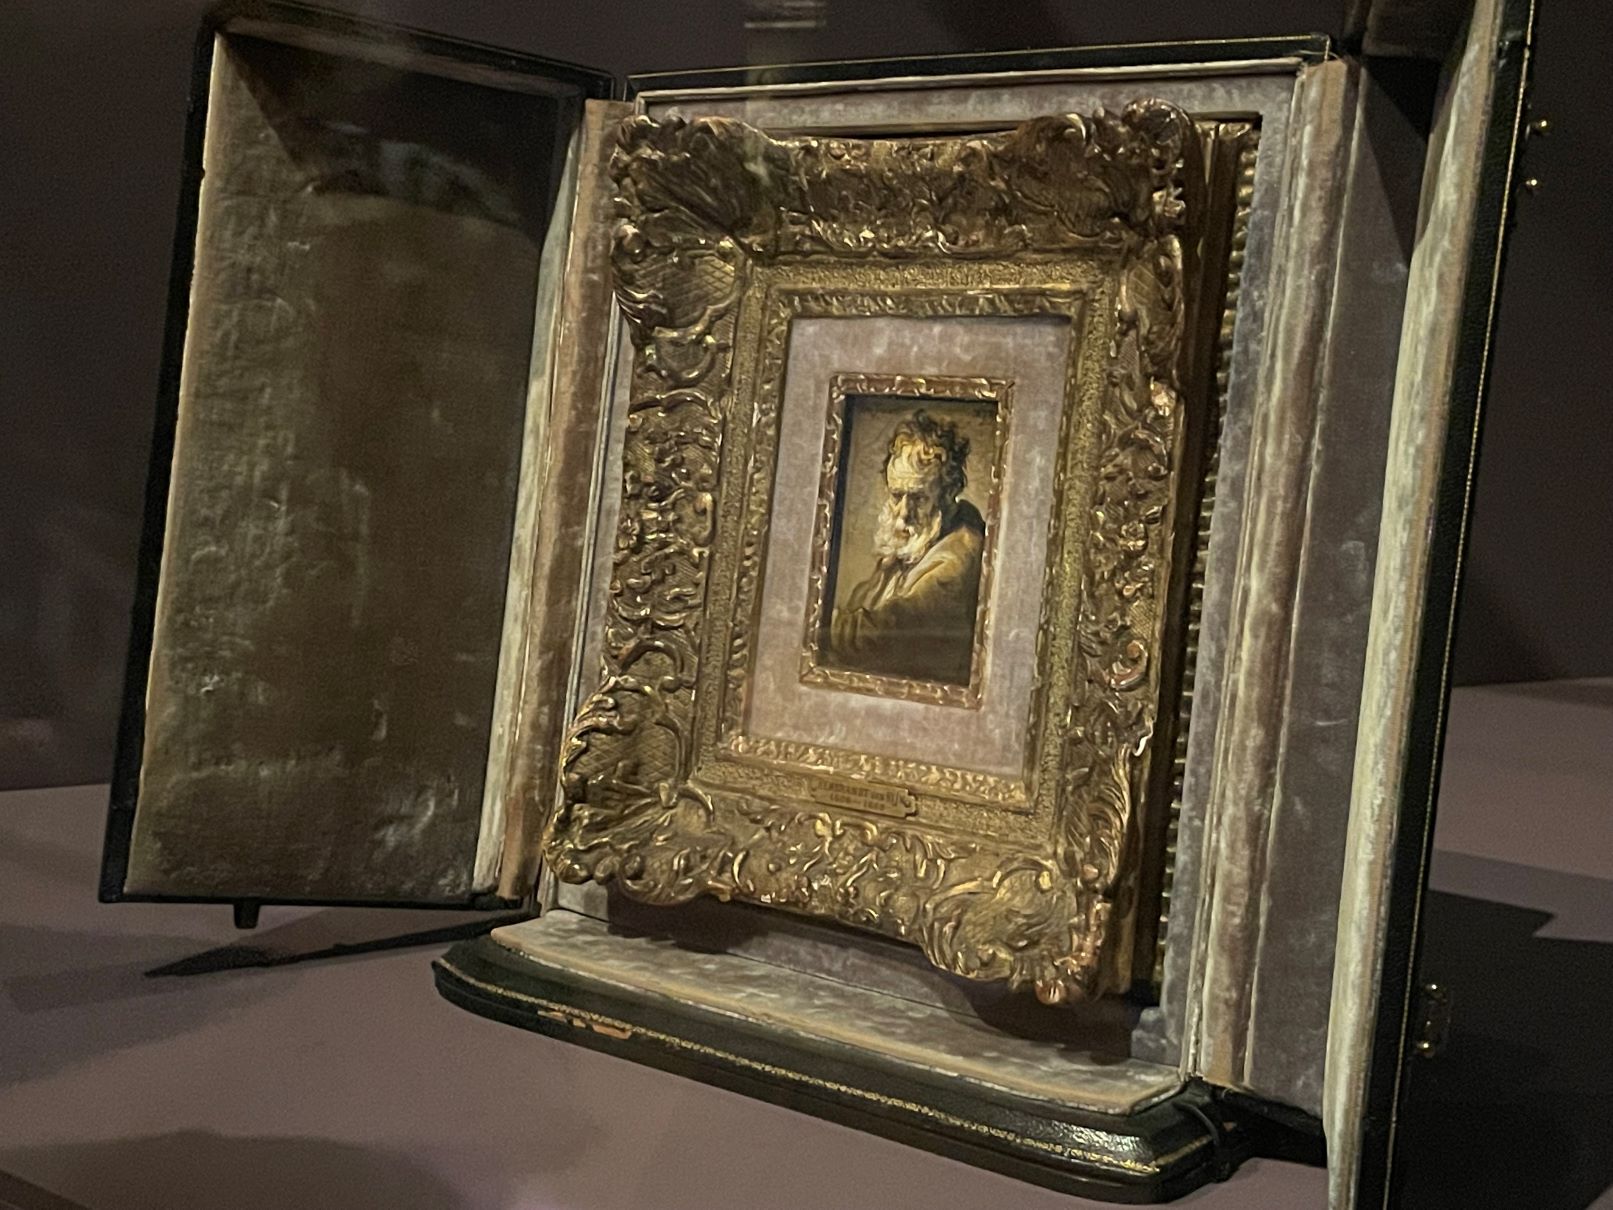 World's 'most expensive painting for its size' on display at Hermitage Museum - DutchNews.nl